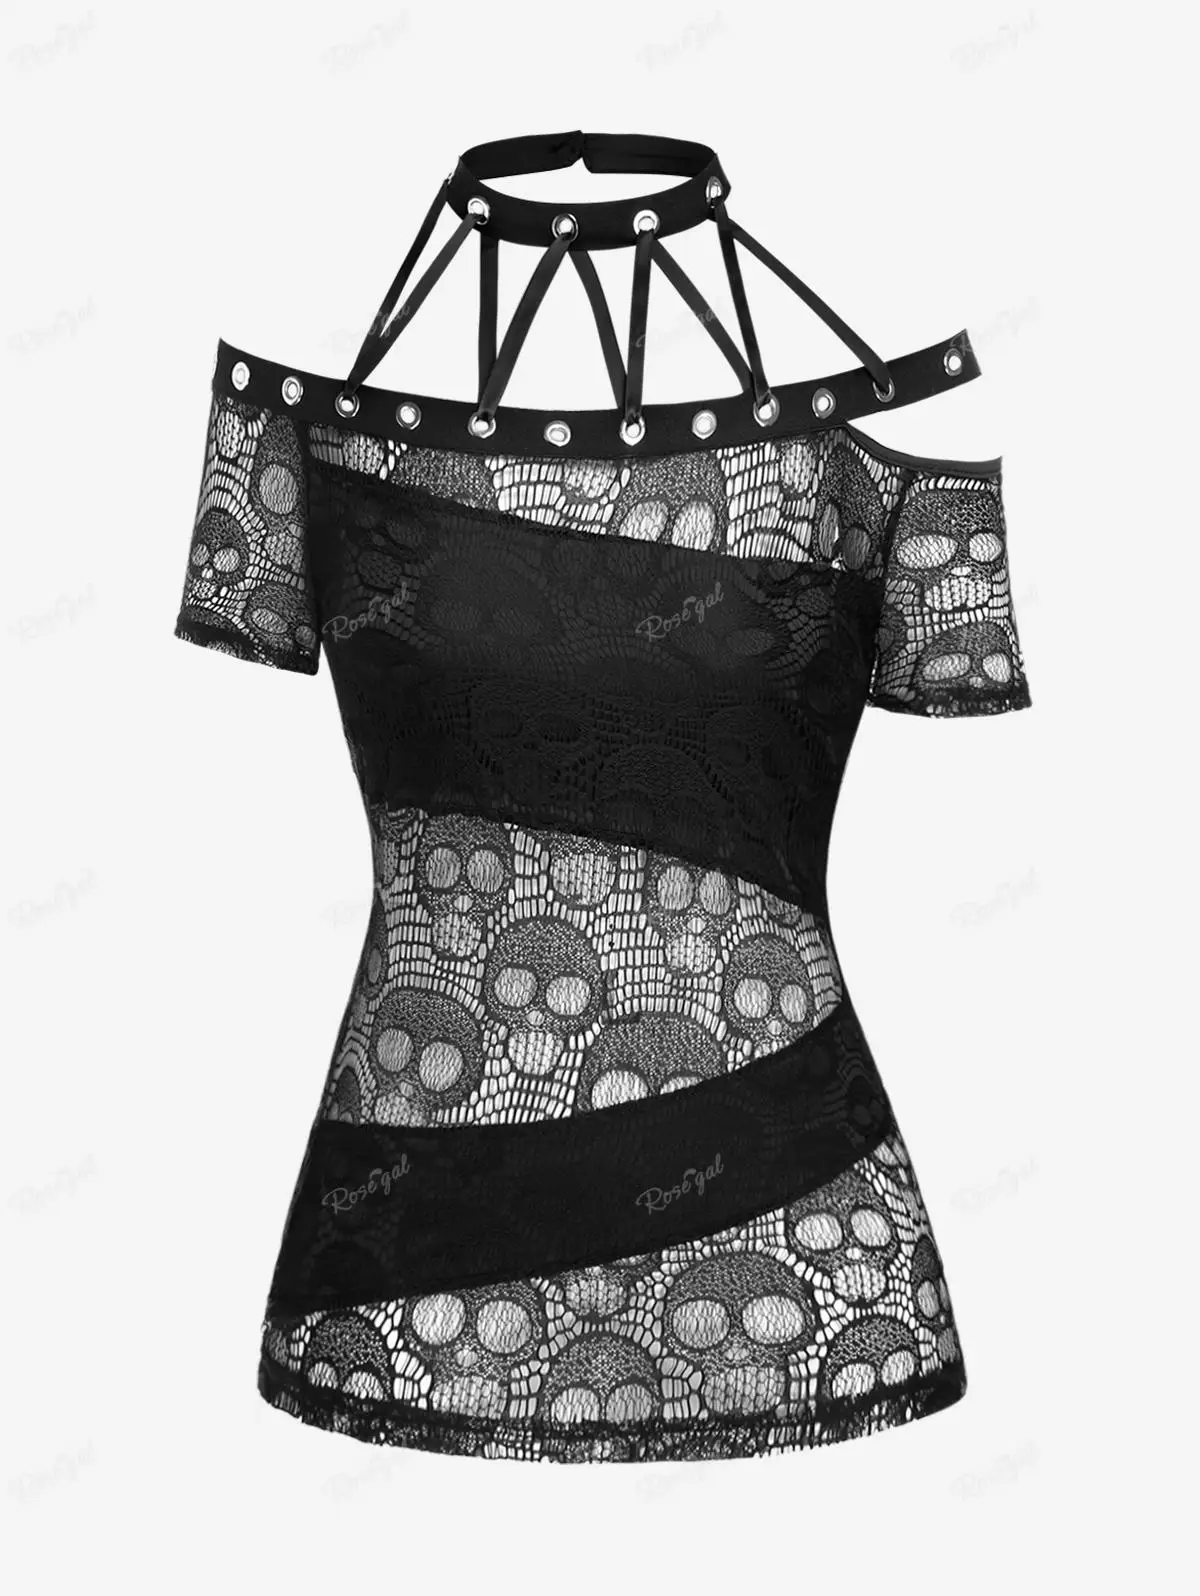 

ROSEGAL Plus Size Gothic Skull Lace Grommets Halter Neck Tops Women Summer Streetwear Sexy Sheer Lace-up Cutout T-shirt Black